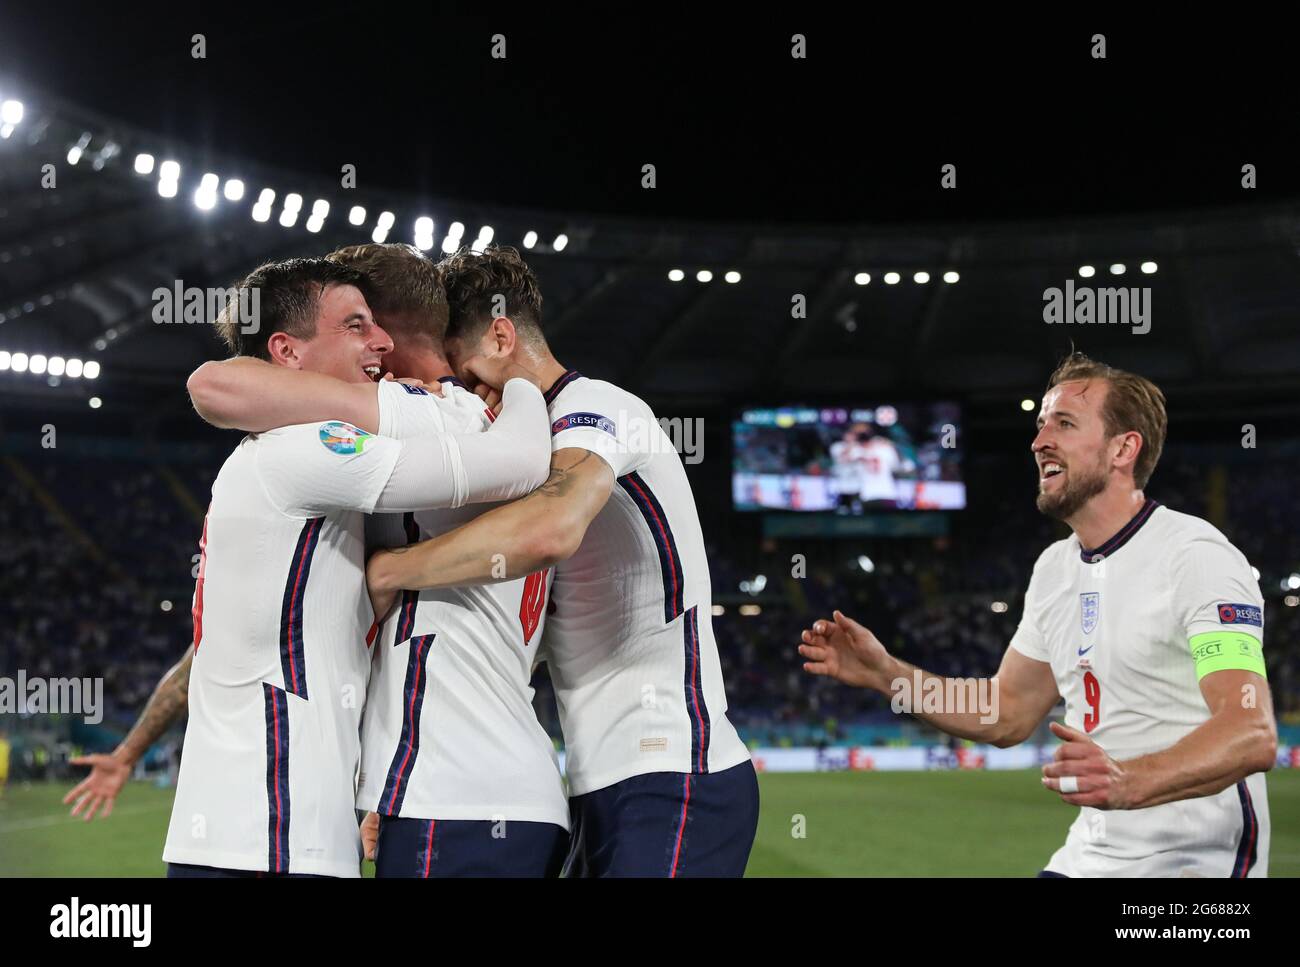 Rome. 3rd July, 2021. Jordan Henderson (2nd L) of England celebrates scoring with teammates during the UEFA EURO 2020 quarterfinal match between England and Ukraine in Rome, Italy on July 3, 2021. Credit: Cheng Tingting/Xinhua/Alamy Live News Stock Photo